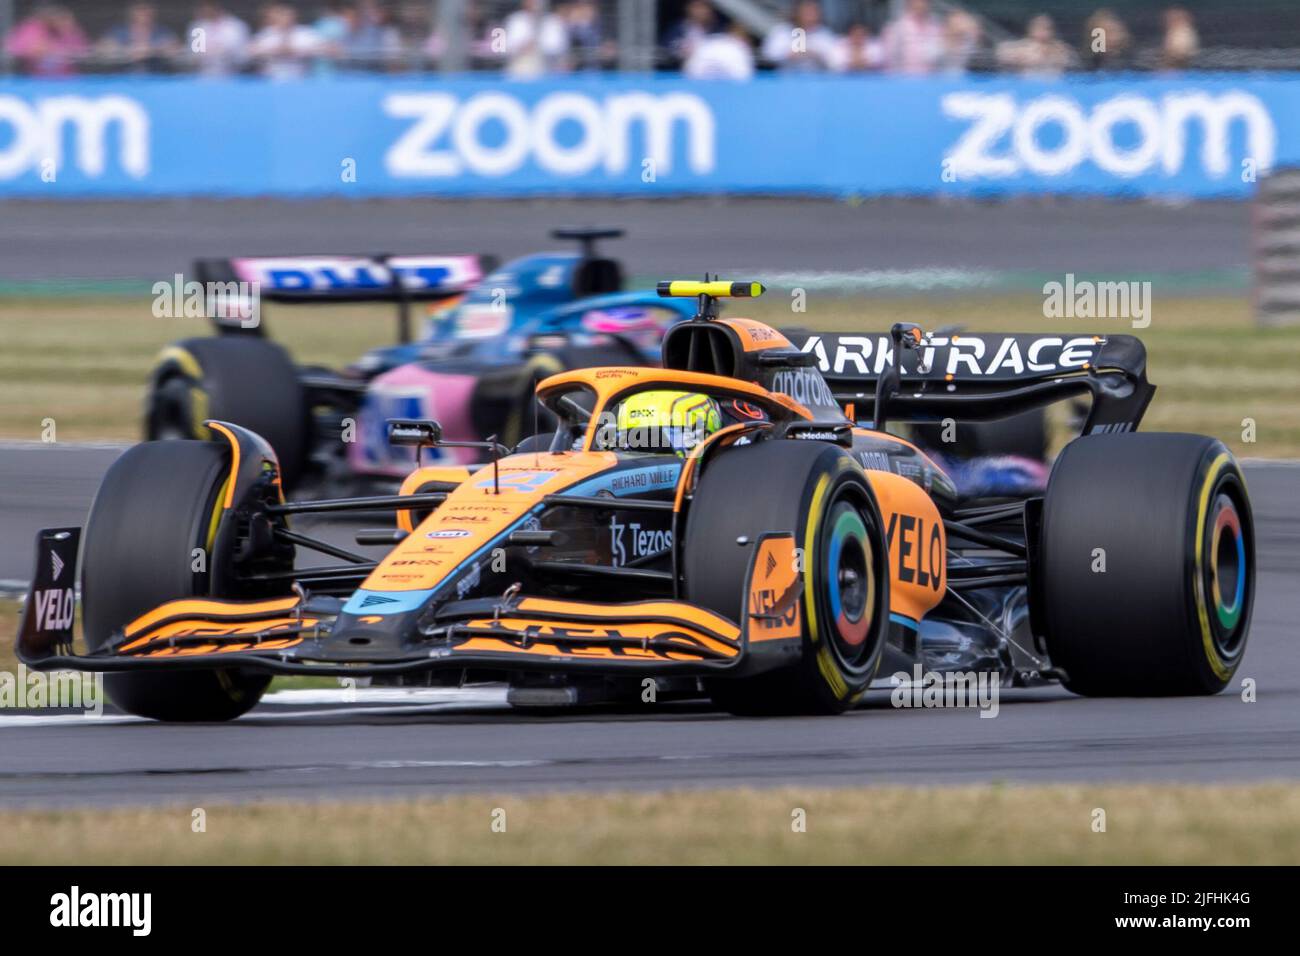 Silverstone, UK. 3rd July 2022,  Silverstone Circuit, Silverstone, Northamptonshire, England: British F1 Grand Prix, Race day: McLaren F1 Team driver Lando Norris in his McLaren-Mercedes MCL36 ahead of BWT Alpine F1 Team driver Fernando Alonso in his Alpine-Renault A522 at the restart of the race Credit: Action Plus Sports Images/Alamy Live News Stock Photo